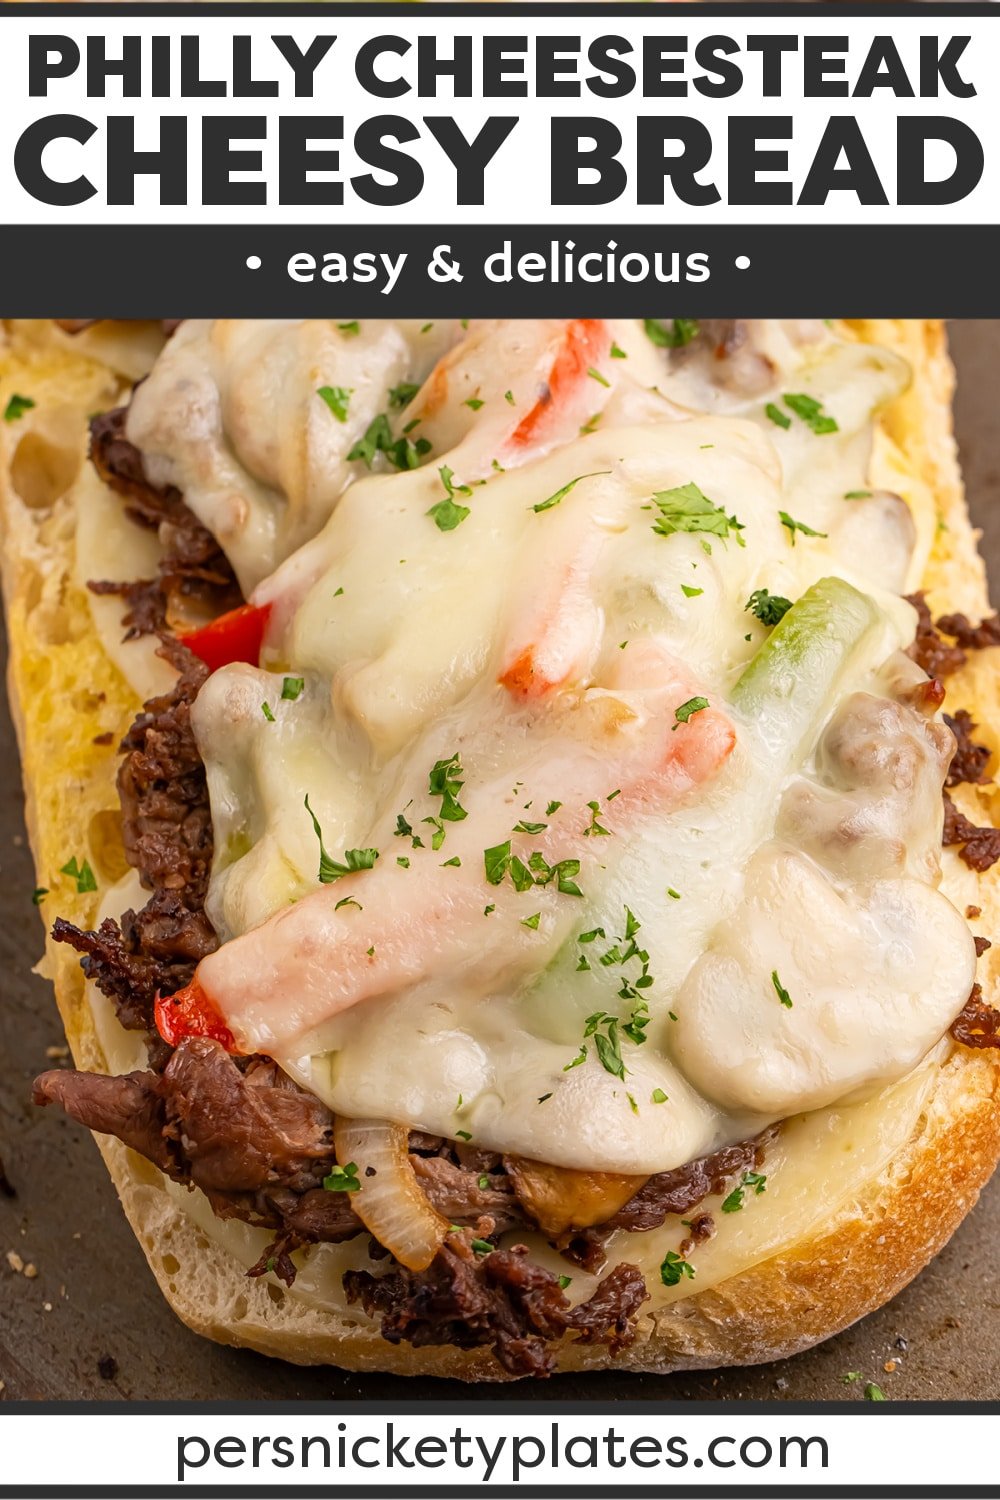 Everything you love about a Philly cheesesteak sandwich in crunchy, cheesy bread form! Steak, peppers, onions, and mushrooms are piled onto this comforting Philly Cheesesteak Bread. | www.persnicketyplates.com